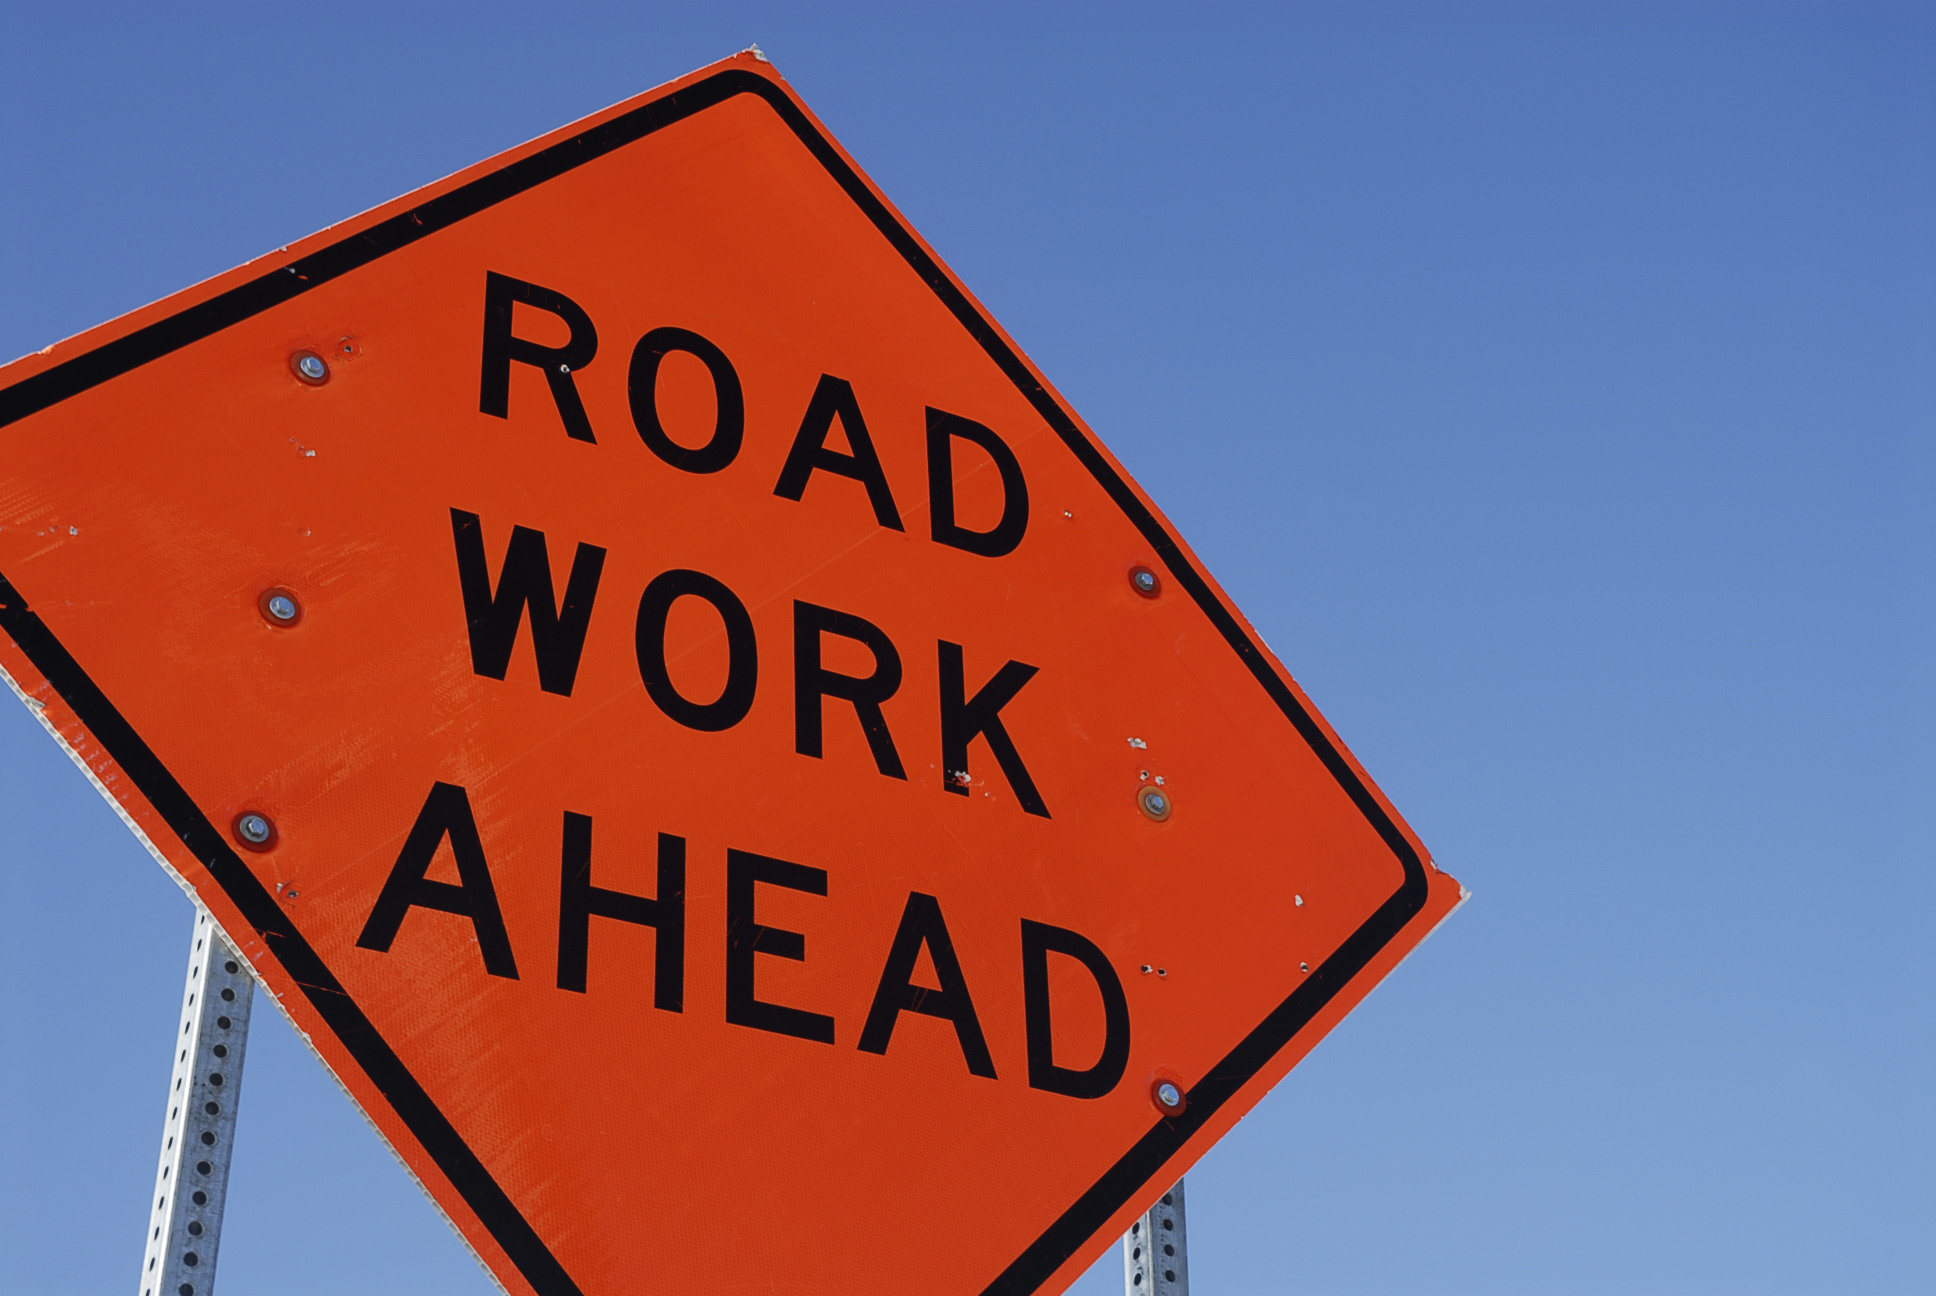 19 Mile Road in Big Rapids to be closed temporarily